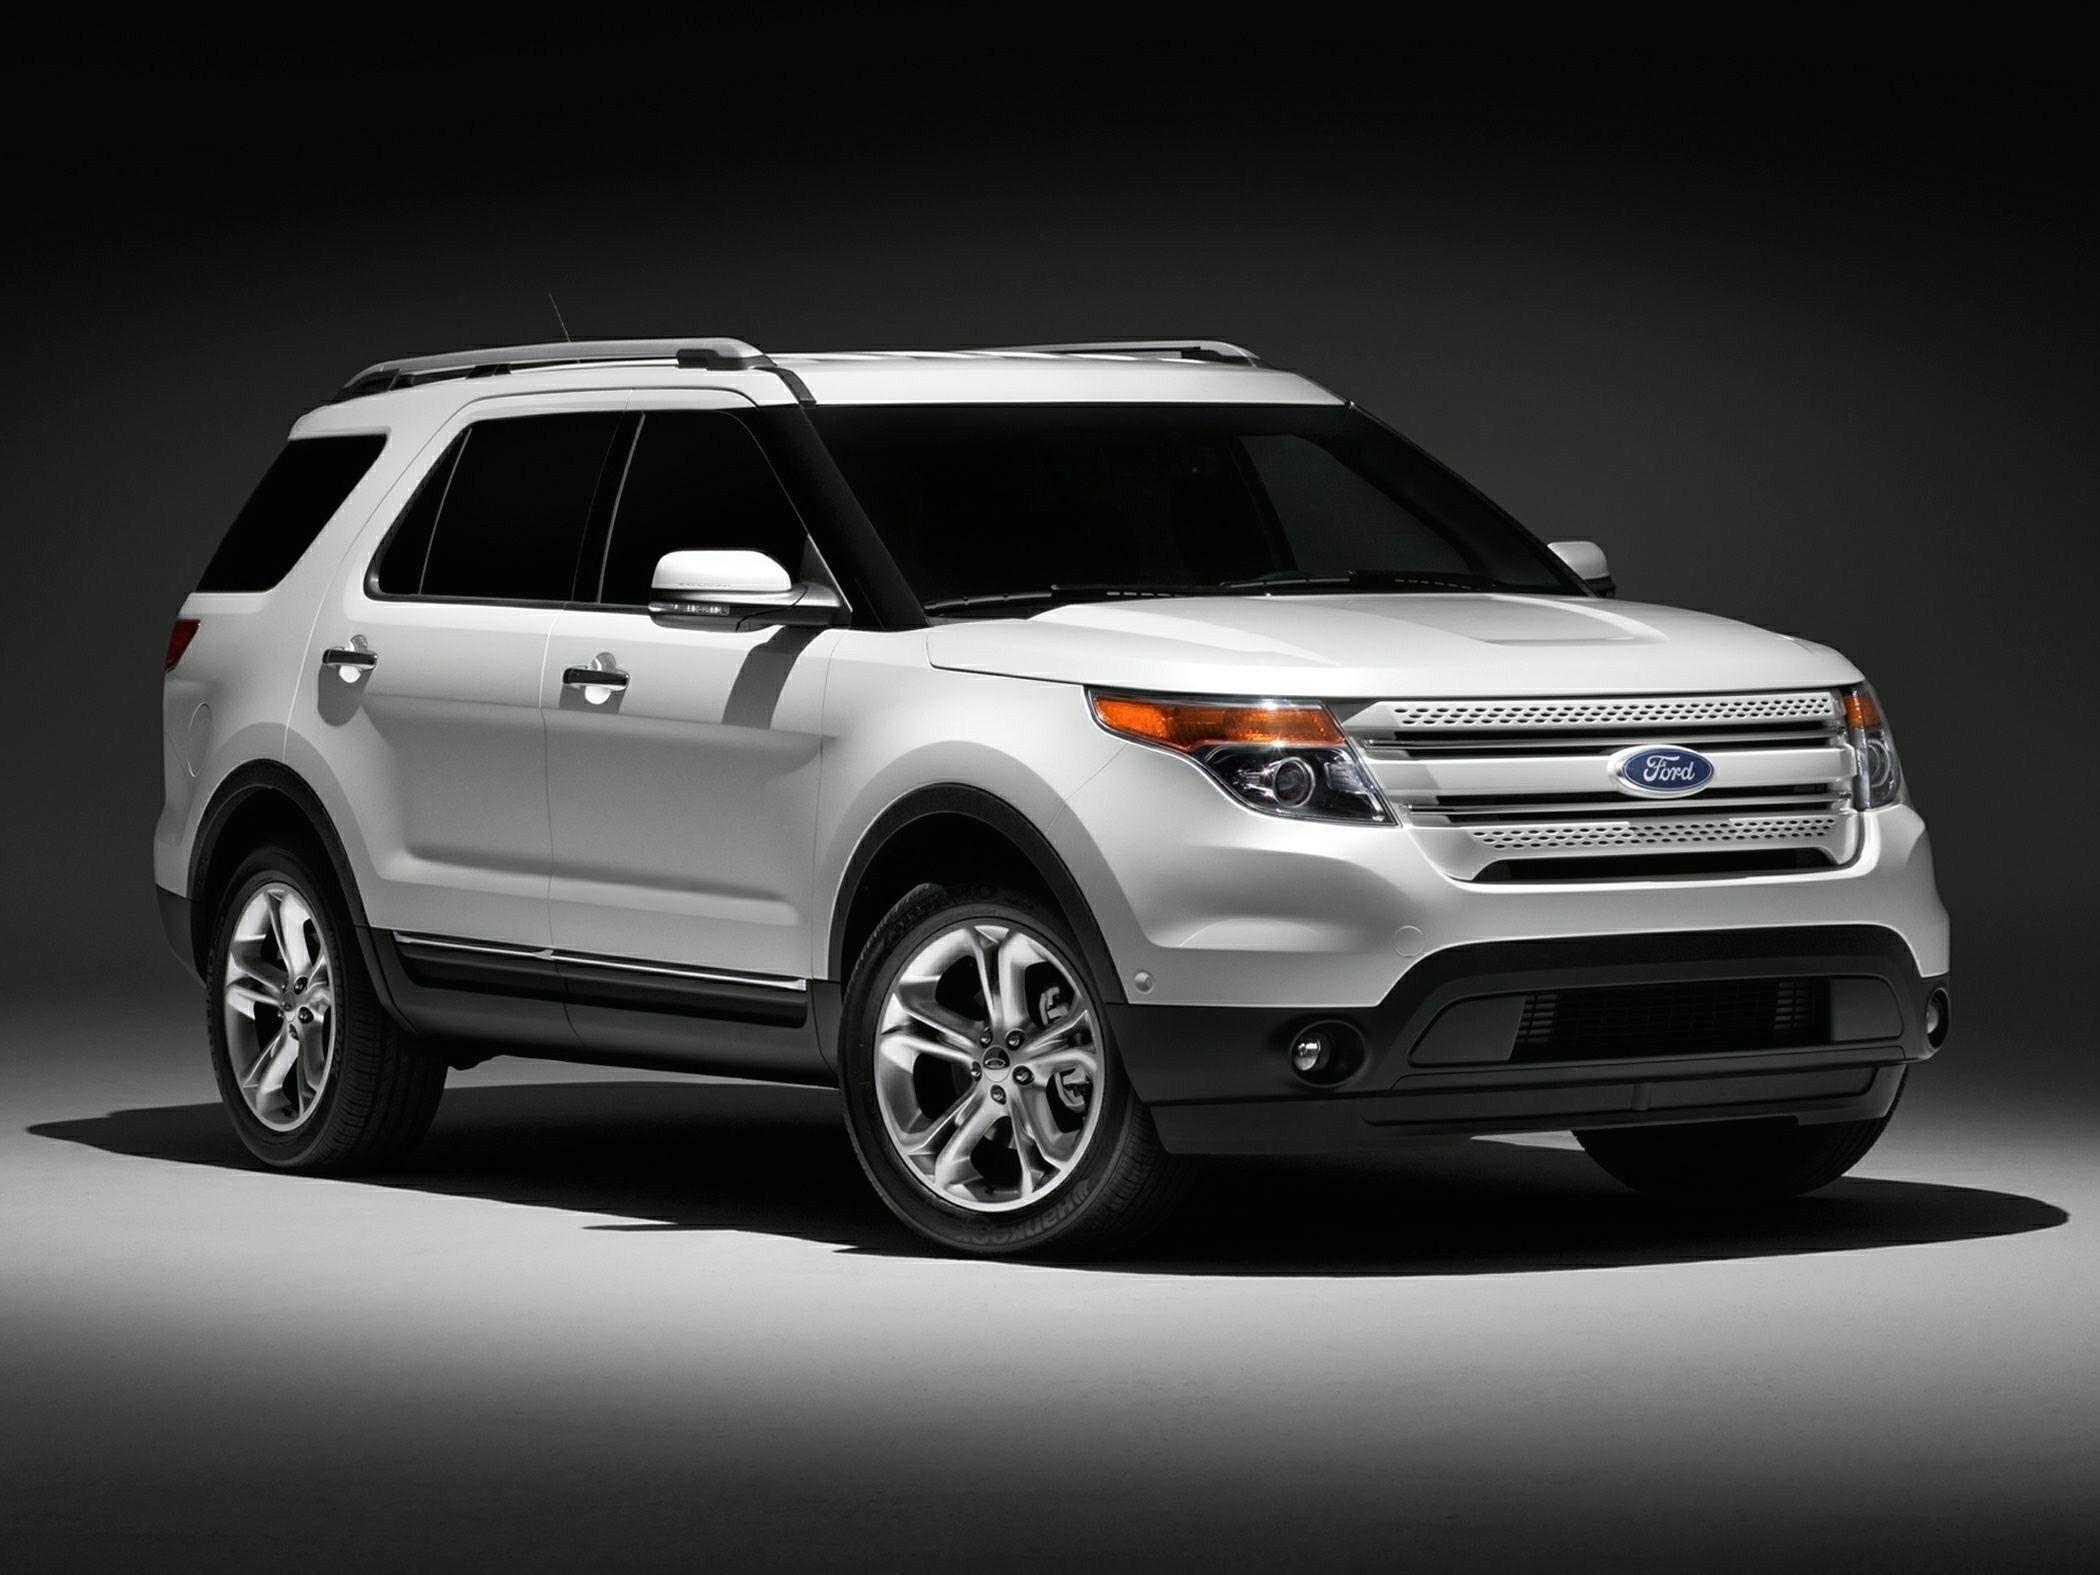 Much 2017 Ford Explorer Limited Interior HD Wallpaper Kind